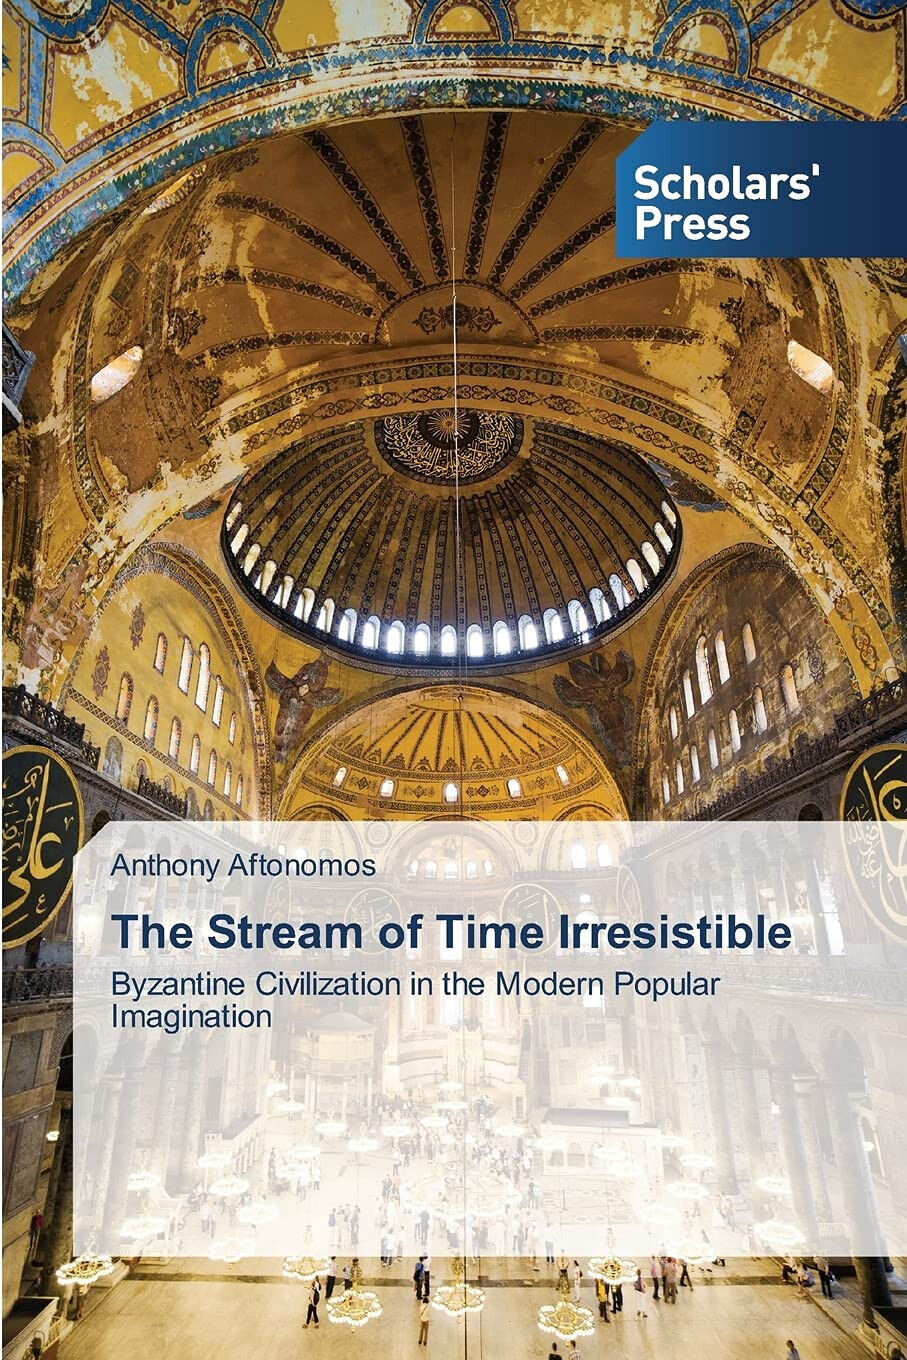 The Stream of Time Irresistible - Anthony Aftonomos - SPS, 2014